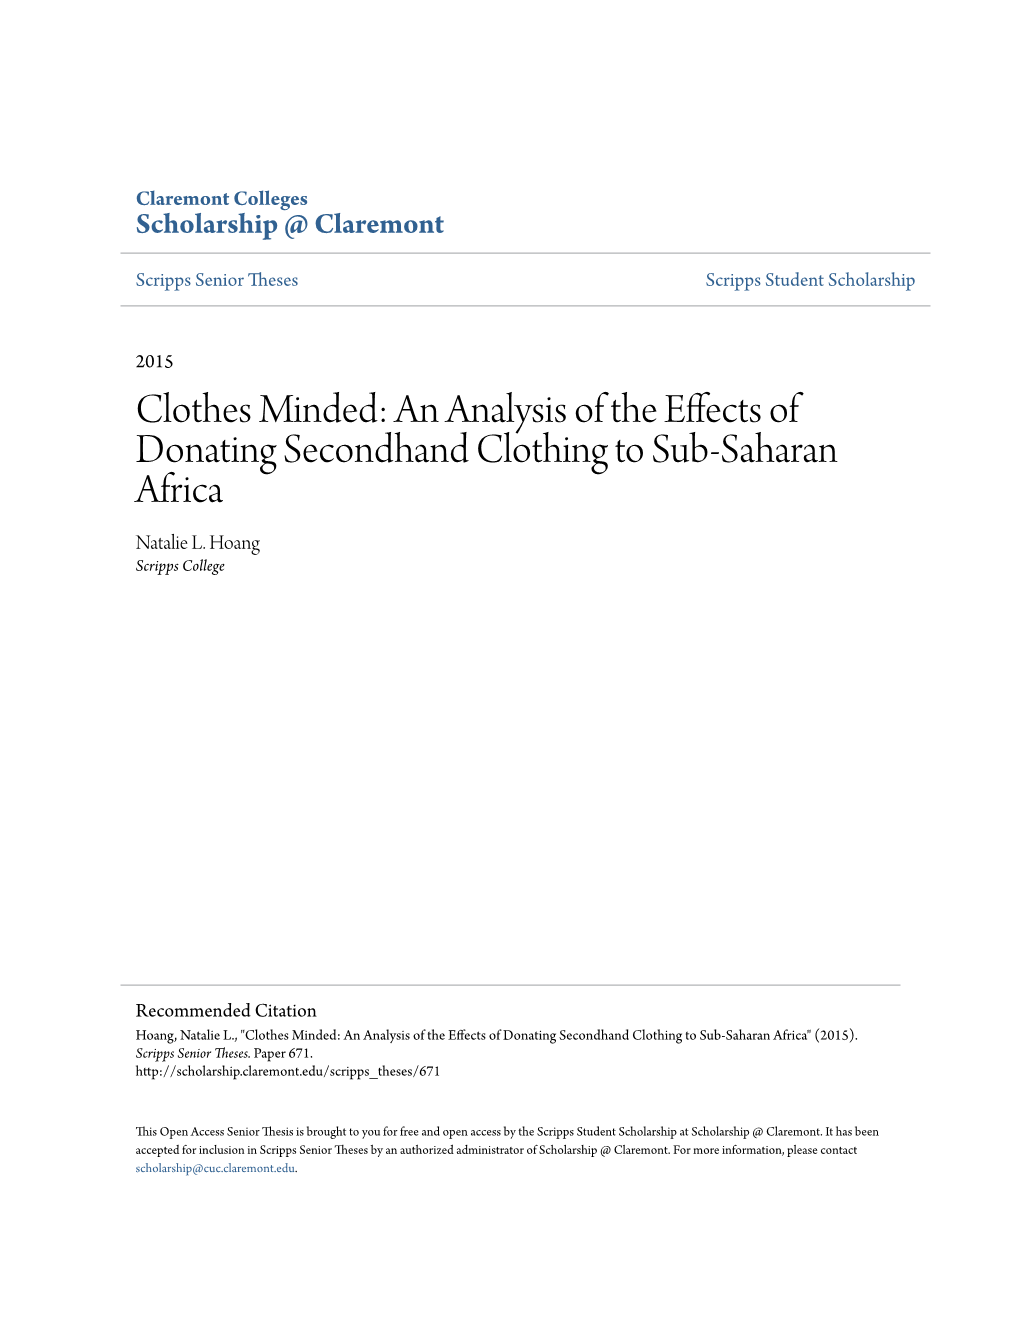 Clothes Minded: an Analysis of the Effects of Donating Secondhand Clothing to Sub-Saharan Africa Natalie L